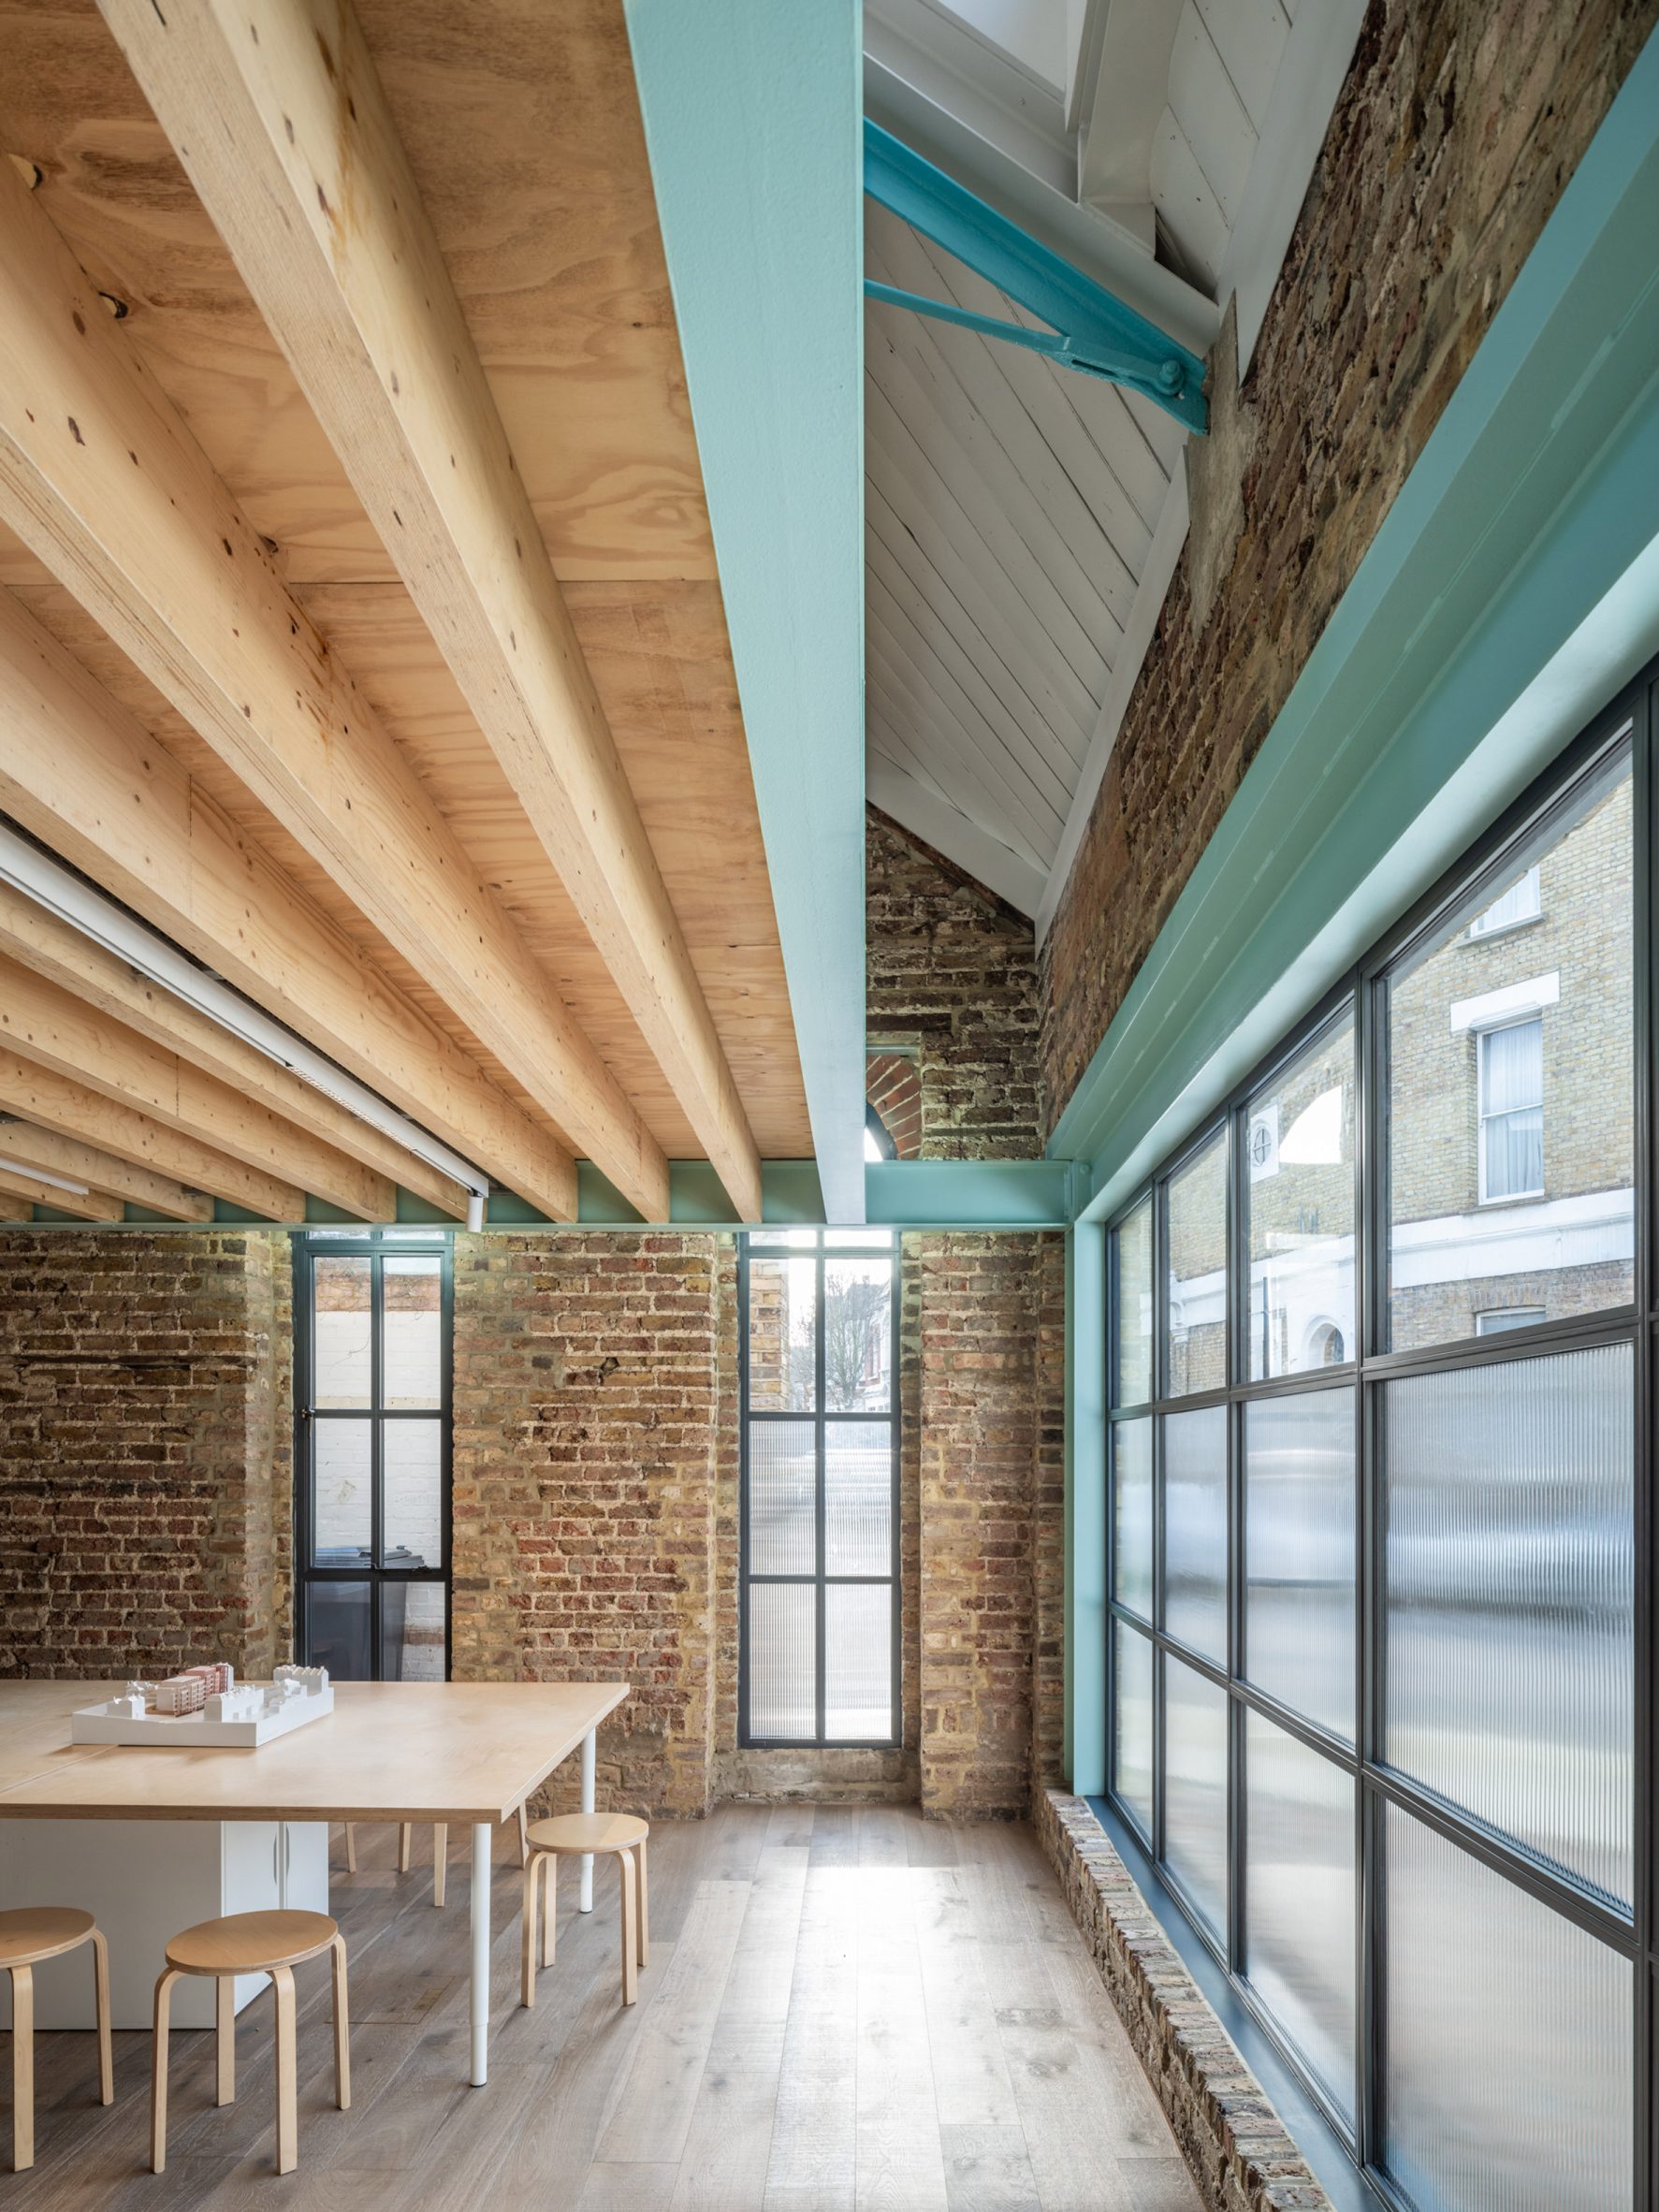 Ground floor of Addison Studios by Tigg + Coll Architects